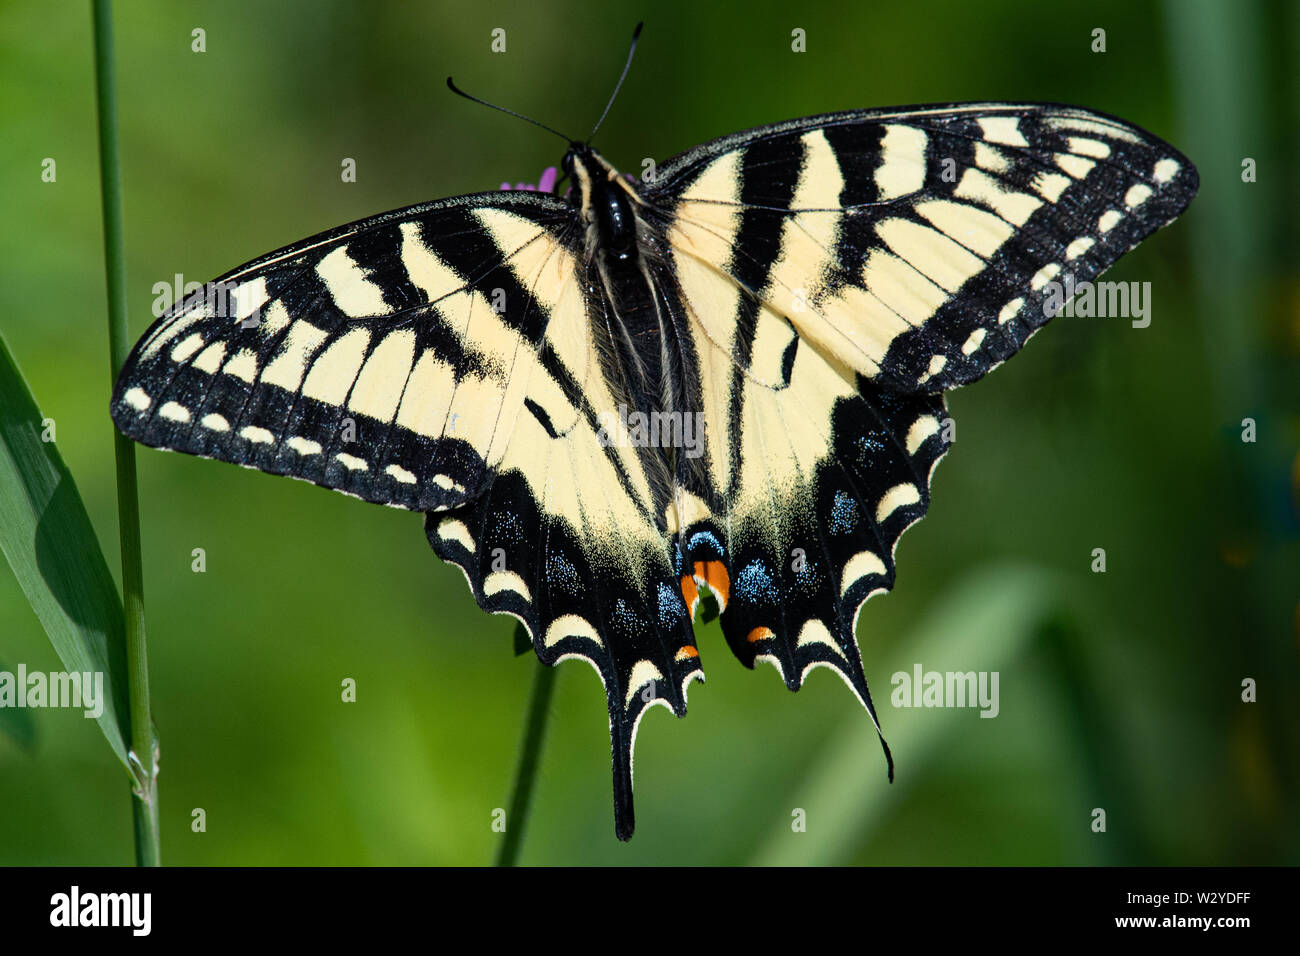 An Eastern Tiger Swallowtail butterfly in a garden in Speculator, NY USA Stock Photo